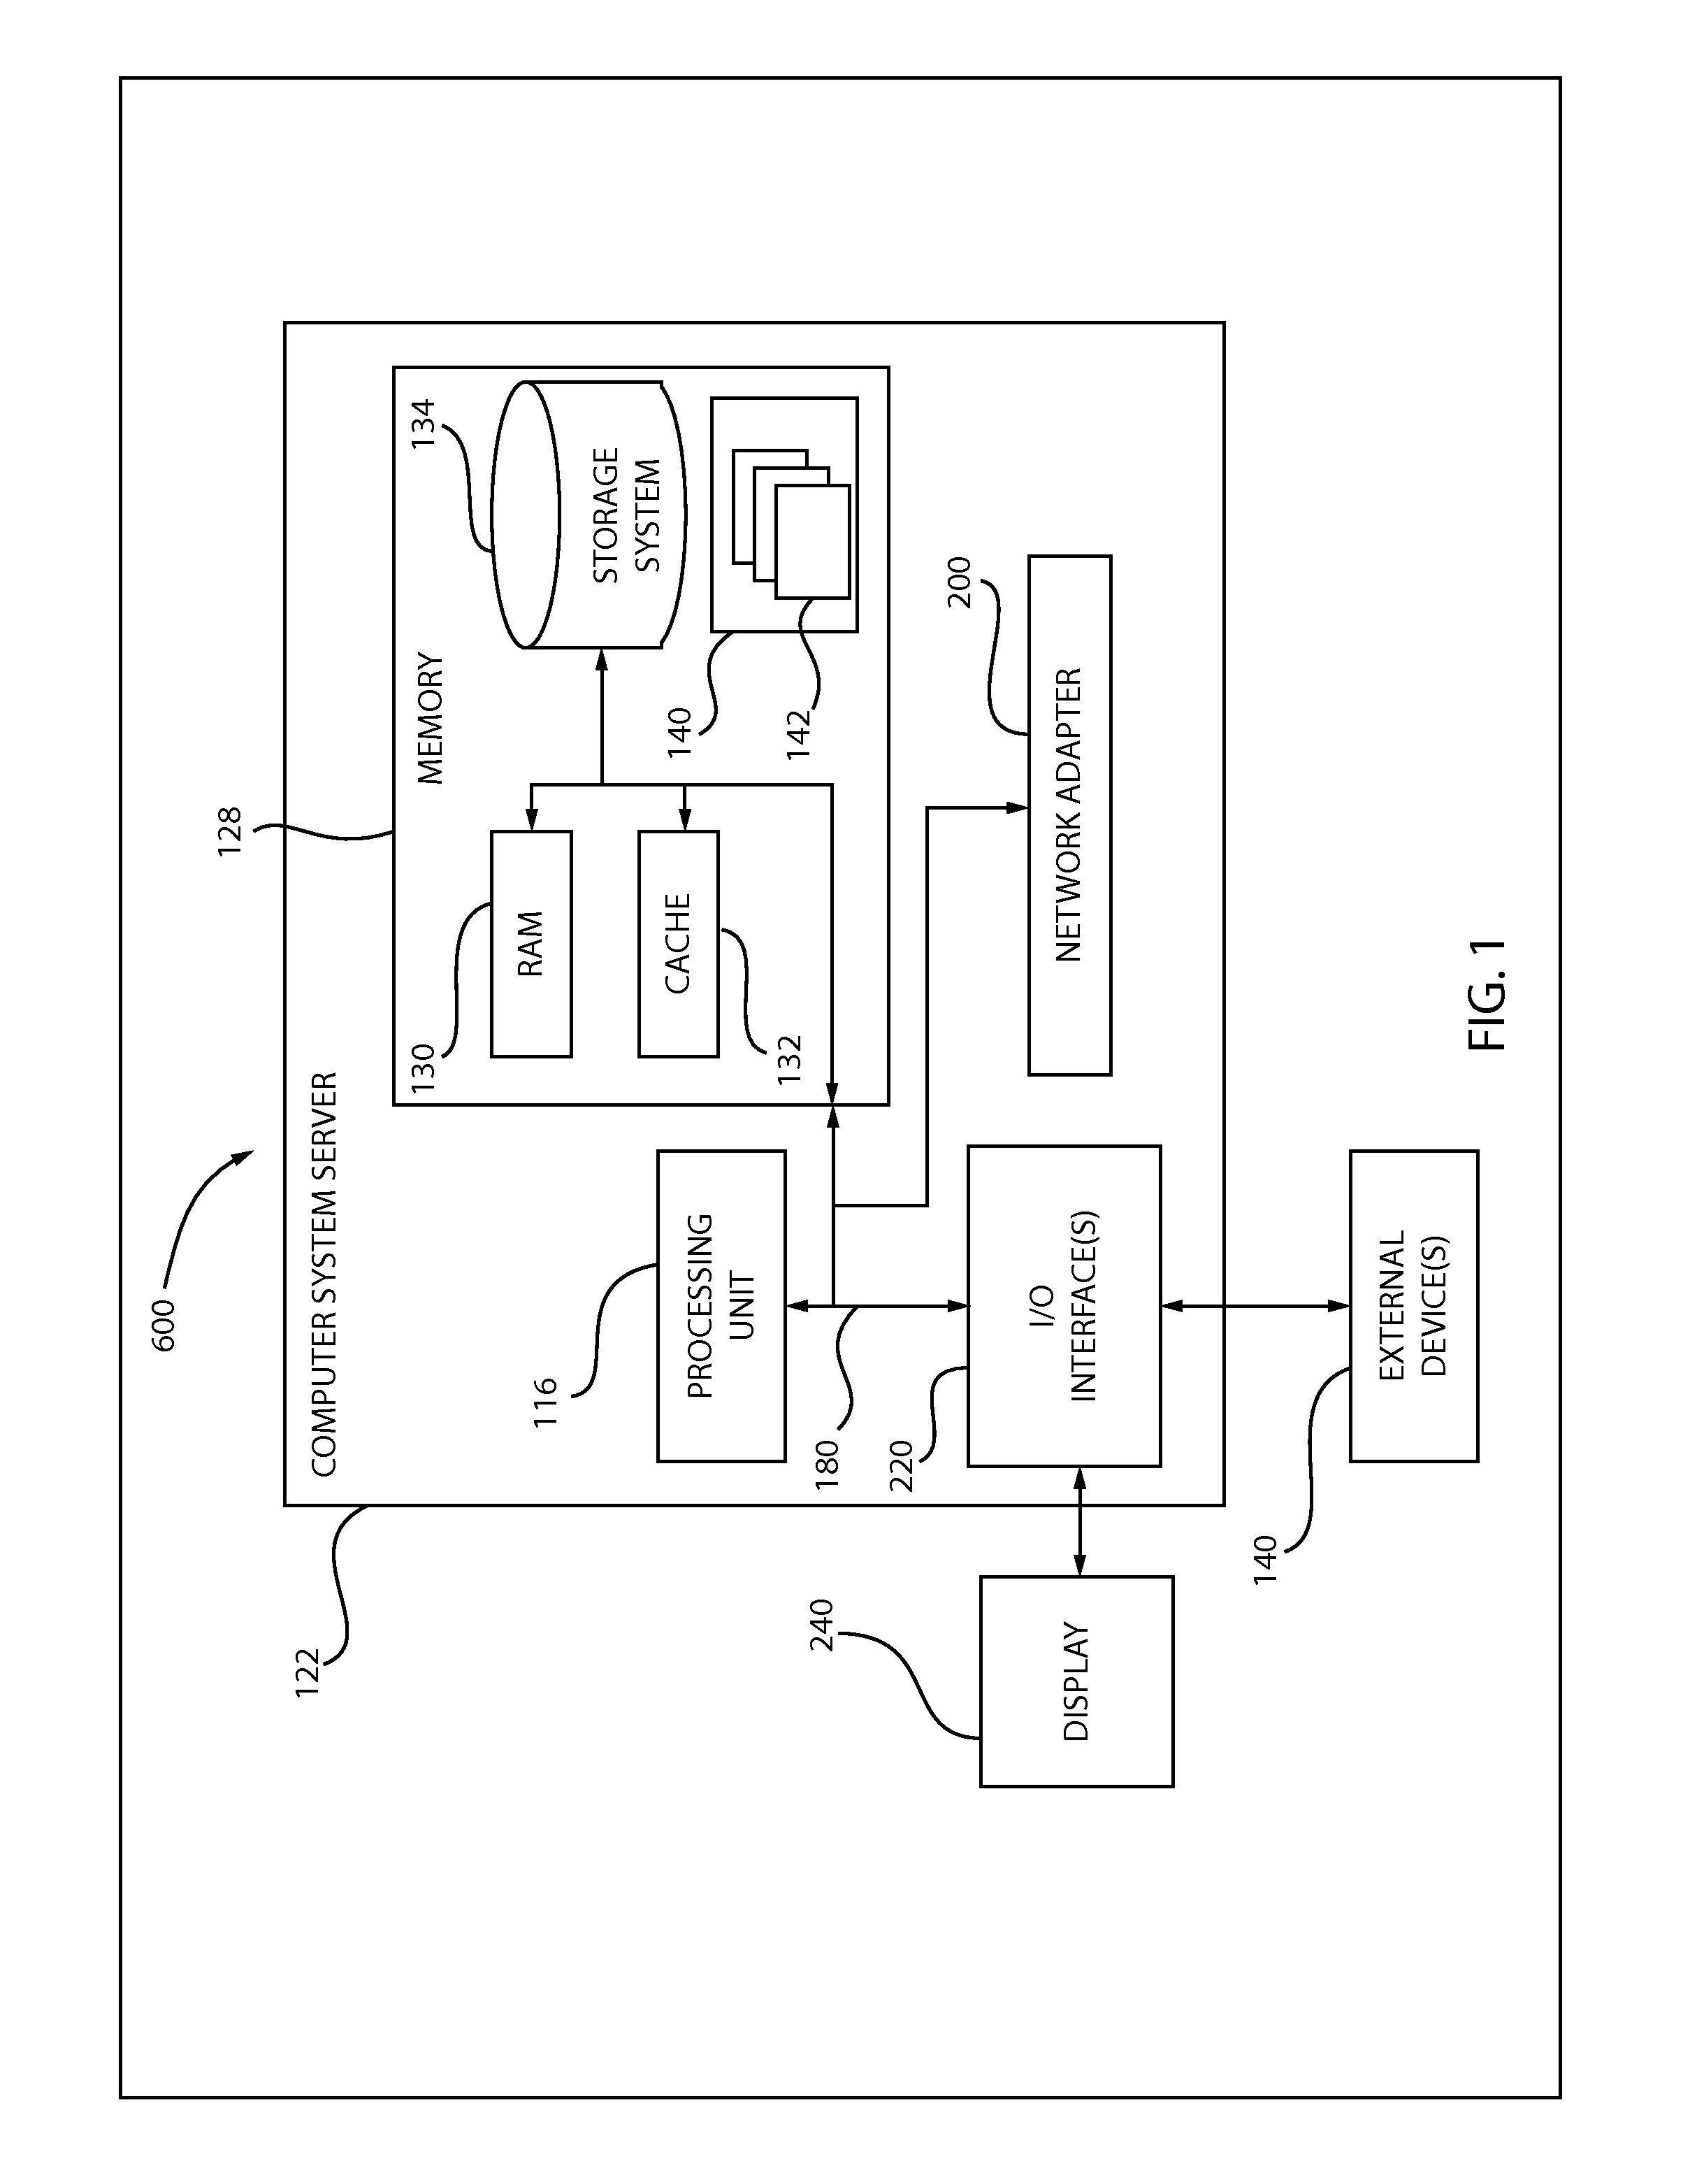 System and method for air-pollutant source-localization using parked motor vehicles